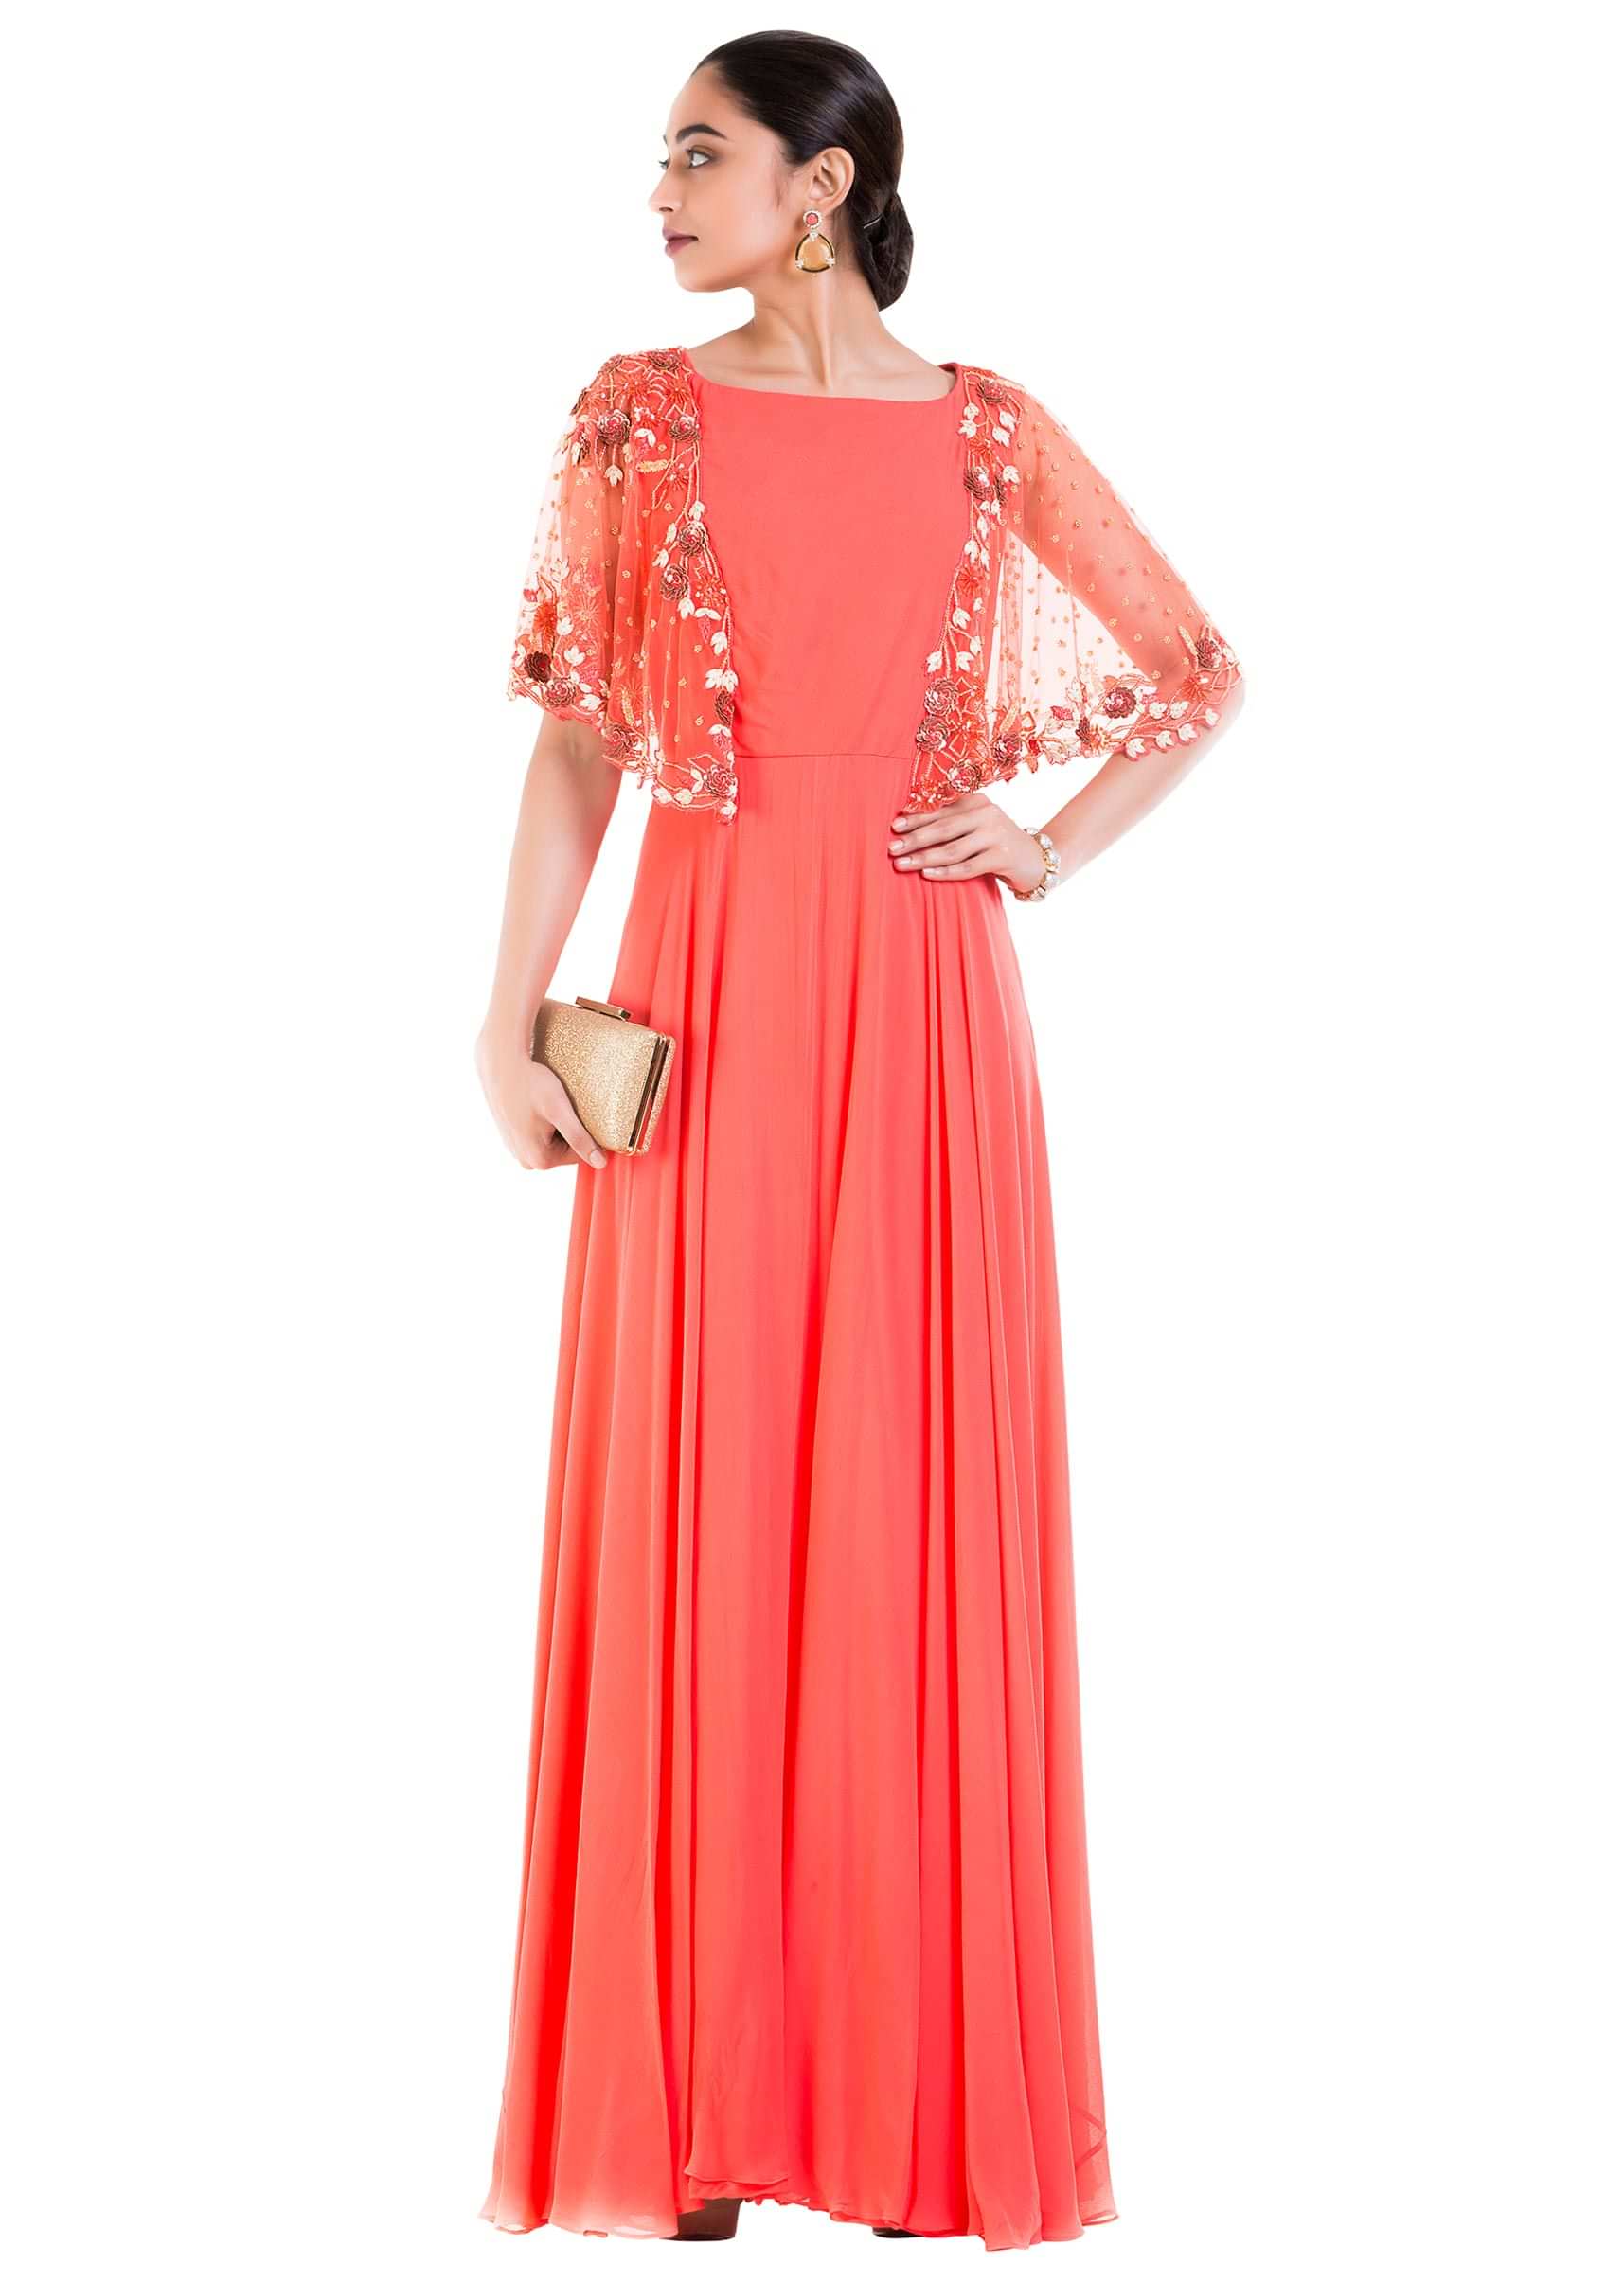 Peach Long Dress With Embroidered Half Cape.